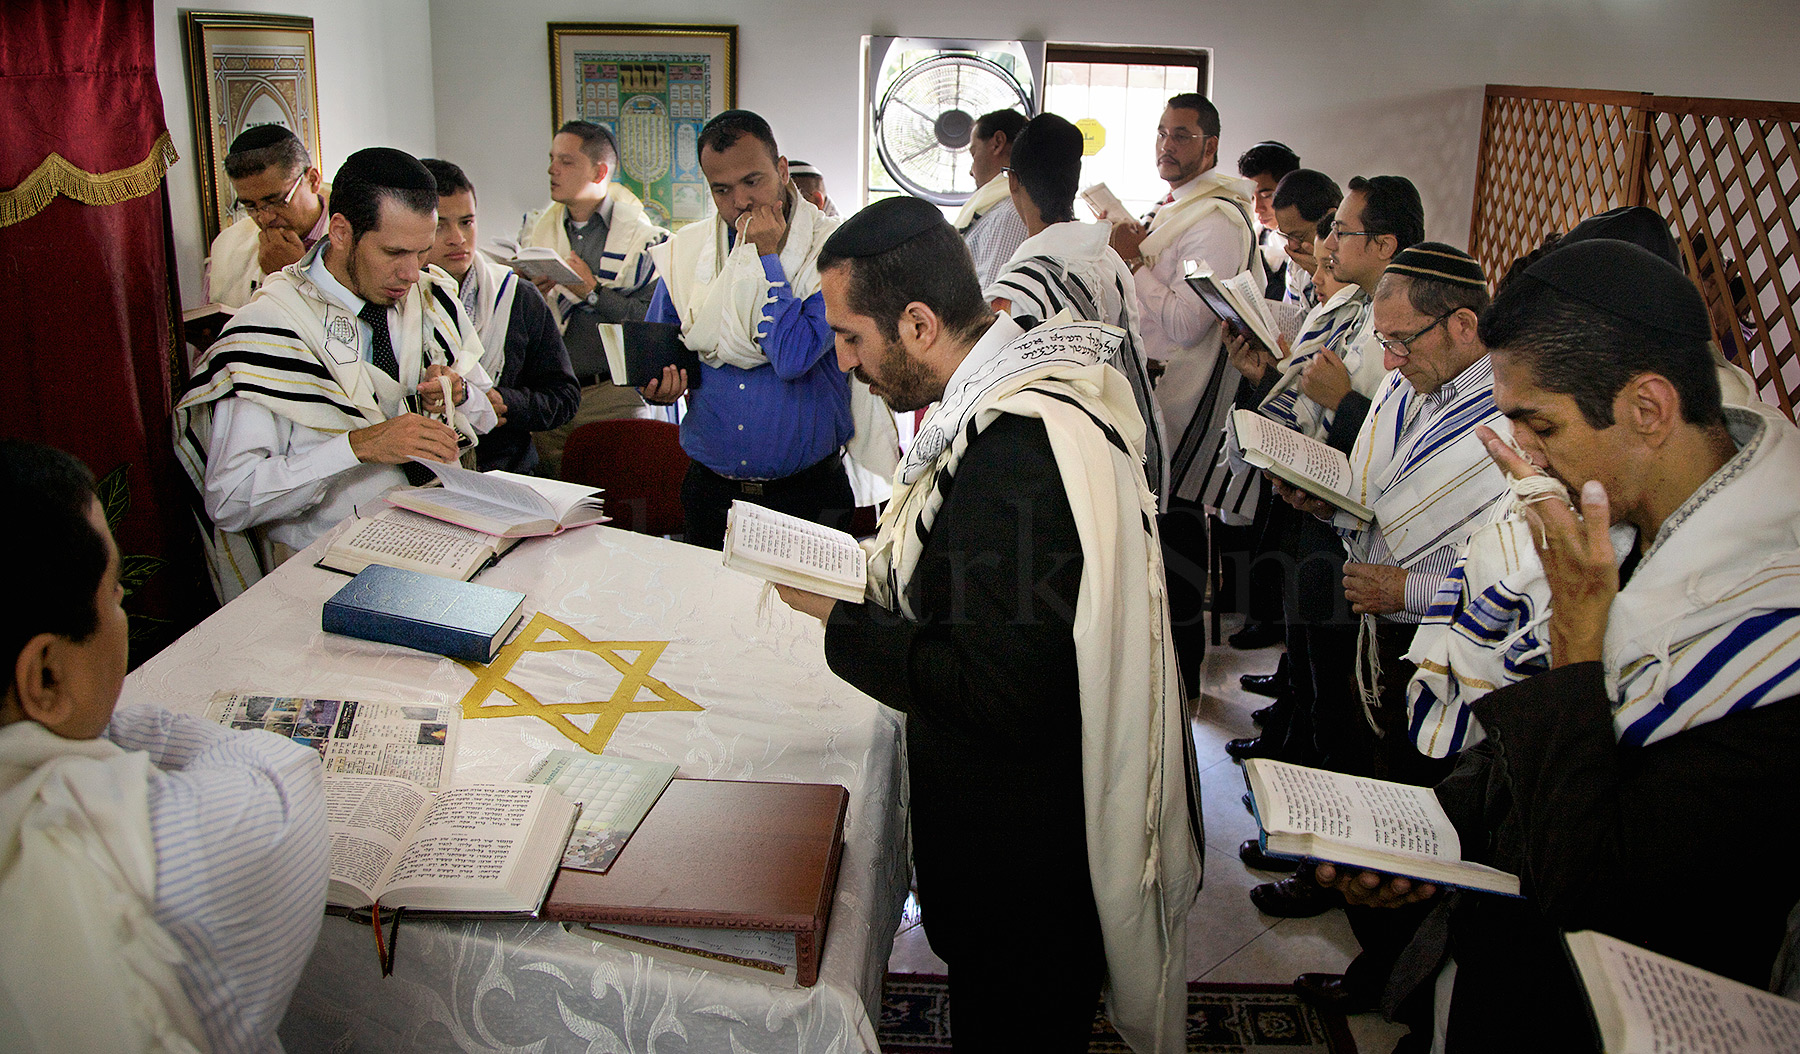 Evangelical Christian converts to Judaism in a synagogue in Bello, Colombia